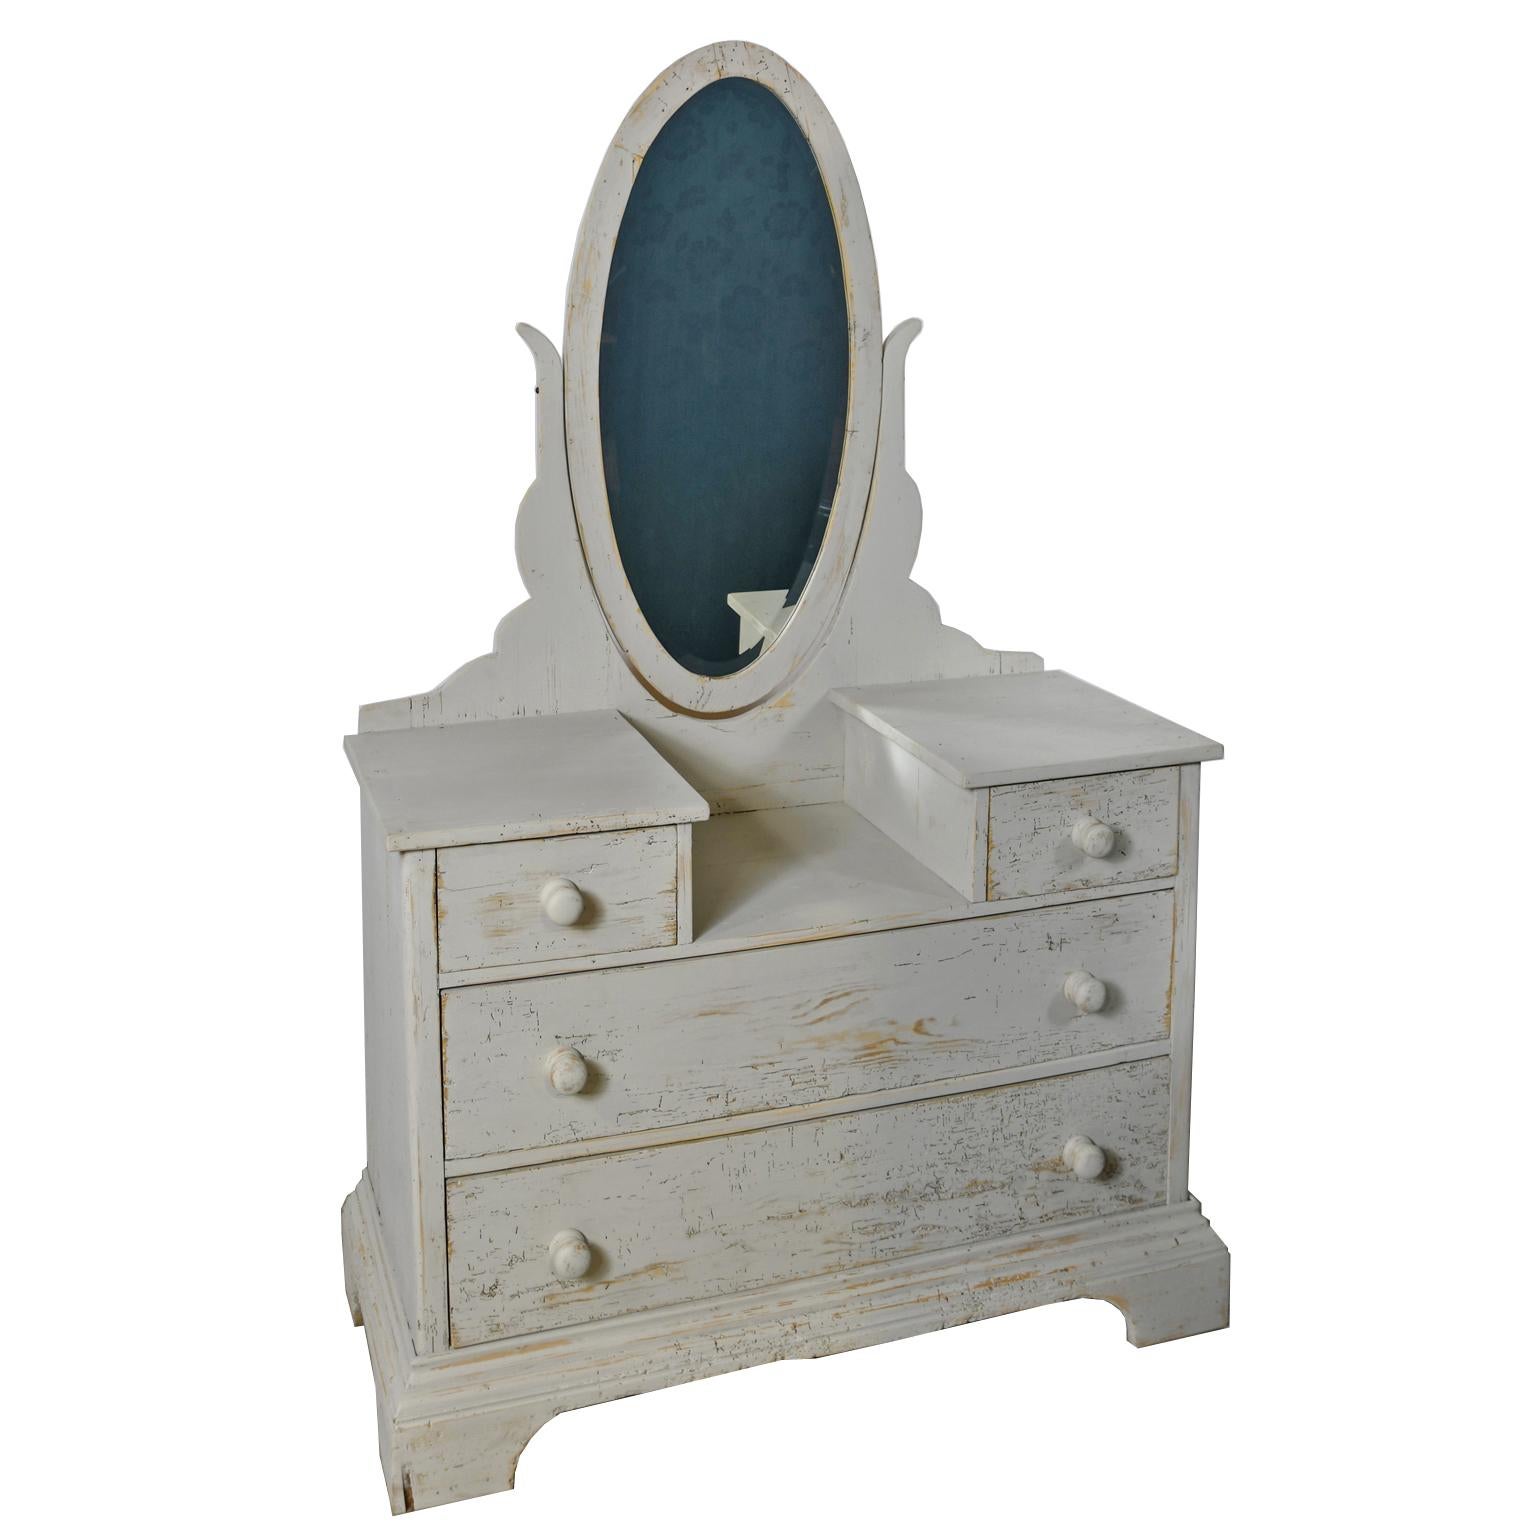 A late 19th century pine chest of drawers or dressing table with newly-painted Gustavian grey/white or driftwood color paint. Offers an oval dressing mirror that pivots and rests over a table surface that is flanked on each side by a pedestal